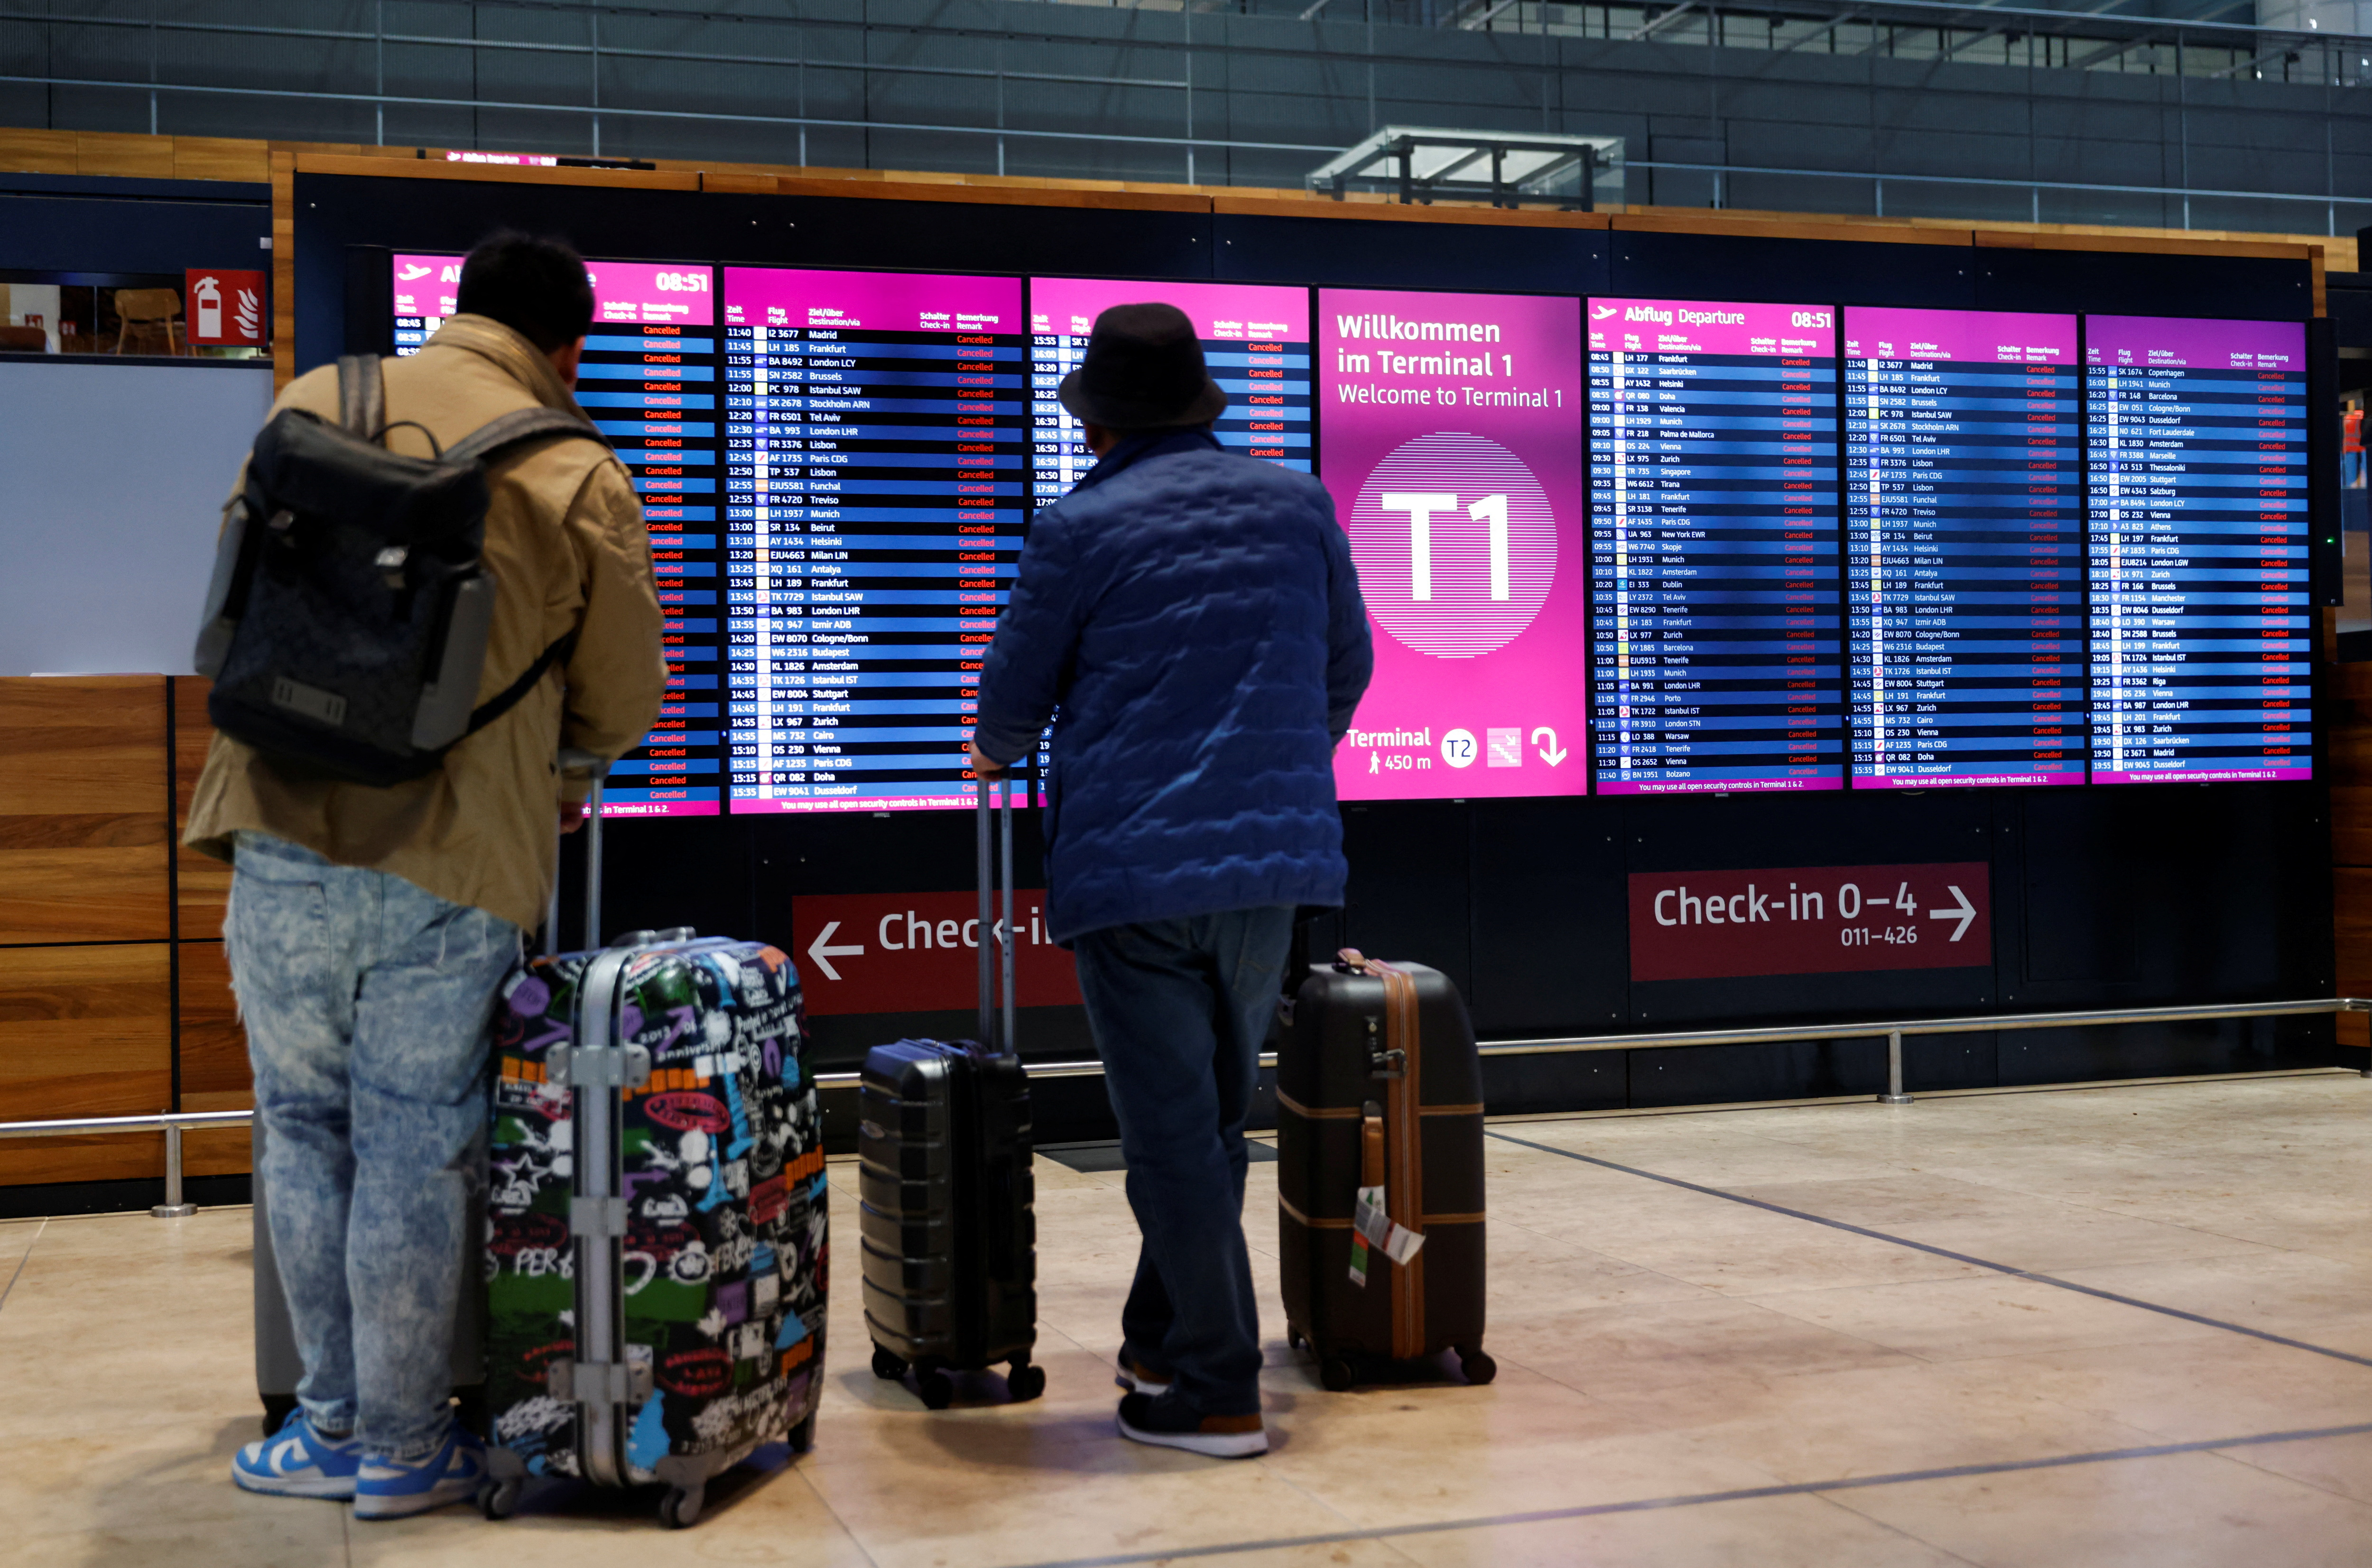 Passengers look at departure panels showing canceled flights during a general strike by employees over pay demands, at the Berlin Brandenburg Airport (BER), in Schoenefeld near Berlin, Germany January 25, 2023. REUTERS/Michele Tantussi